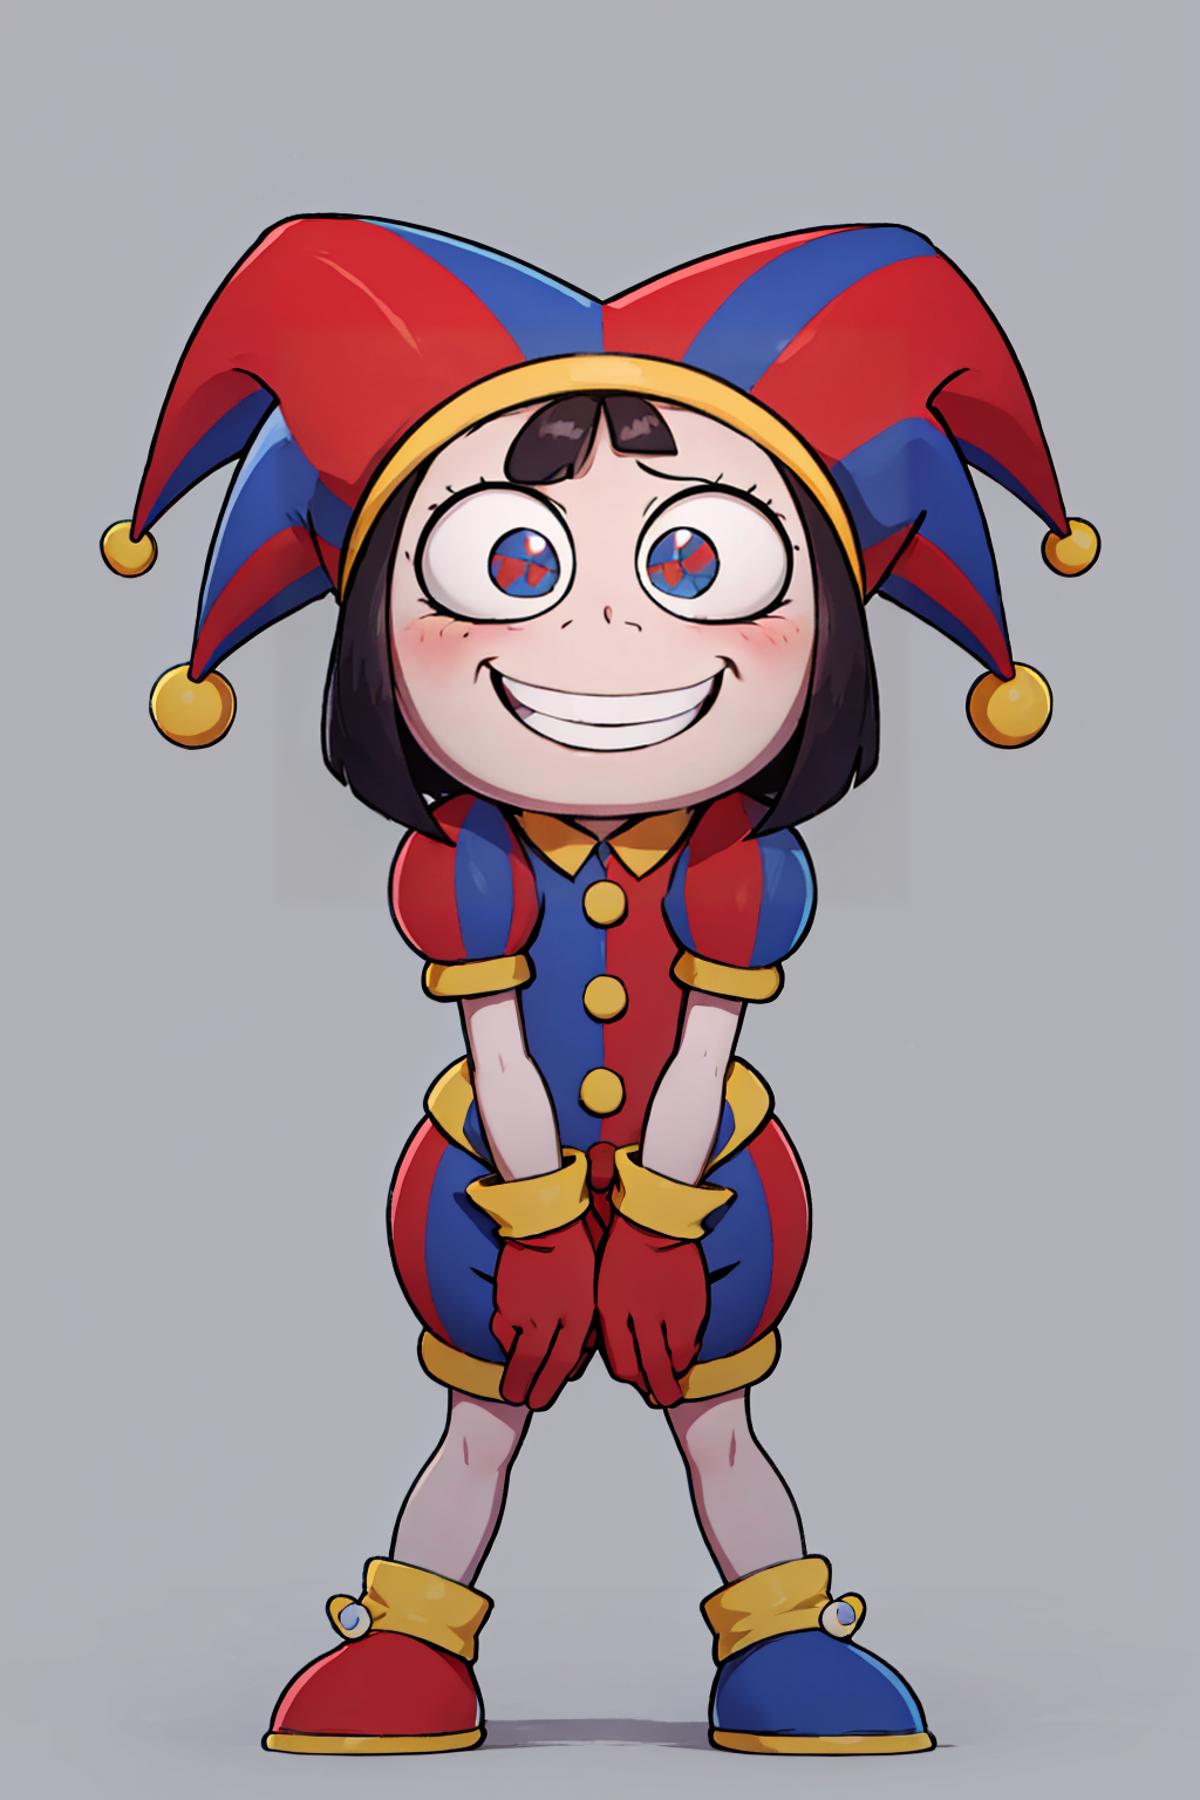 A cartoon character wearing a red, blue, and yellow jester outfit with a smiling face.